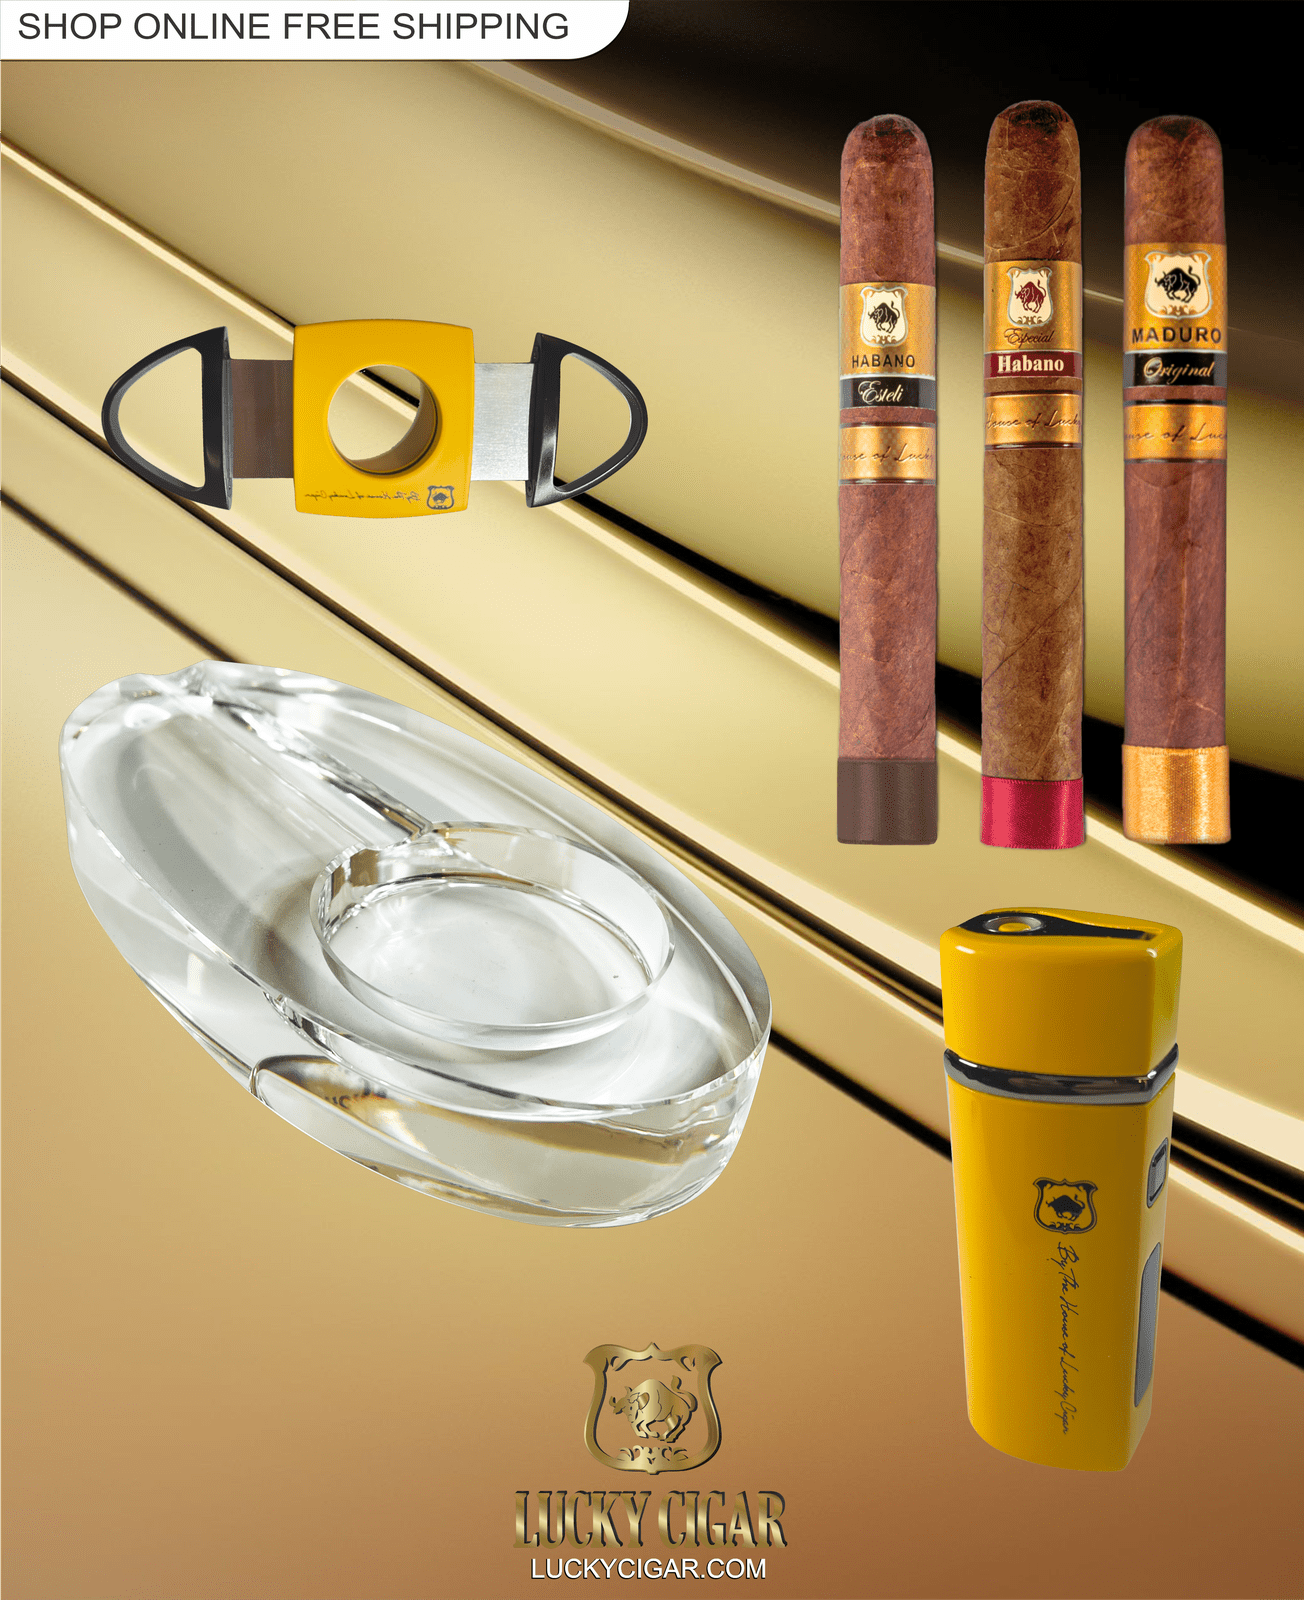 Lucky Cigar Sampler Sets: Set of 3 Cigars with Torch, Cutter, Ashtray